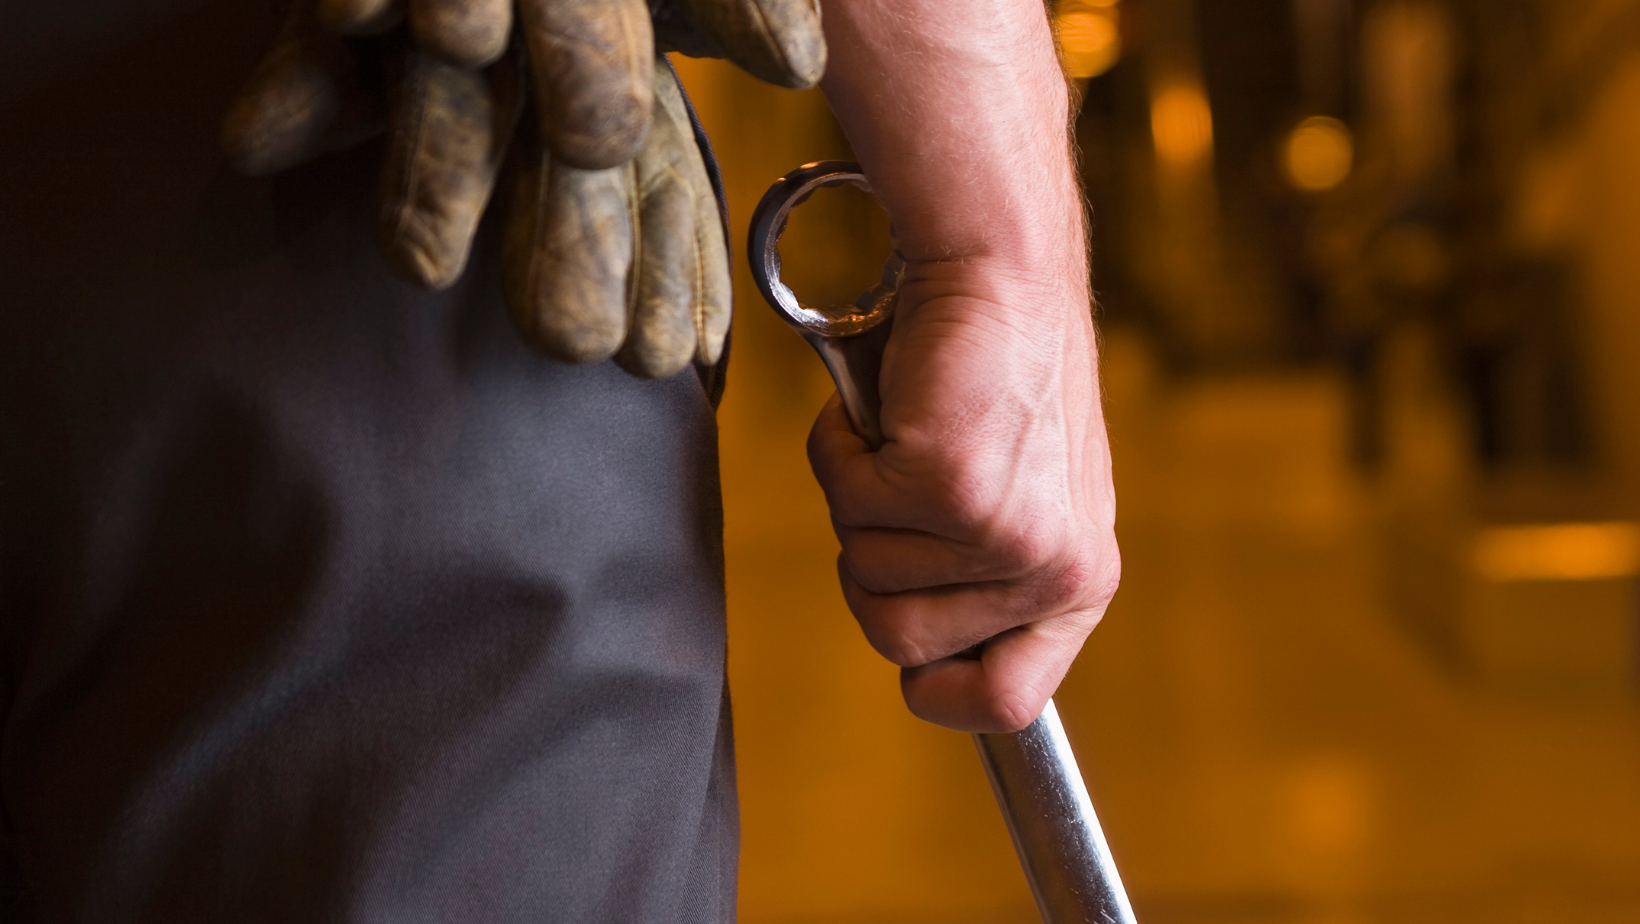 mechanic with gloves in pocket holding wrench